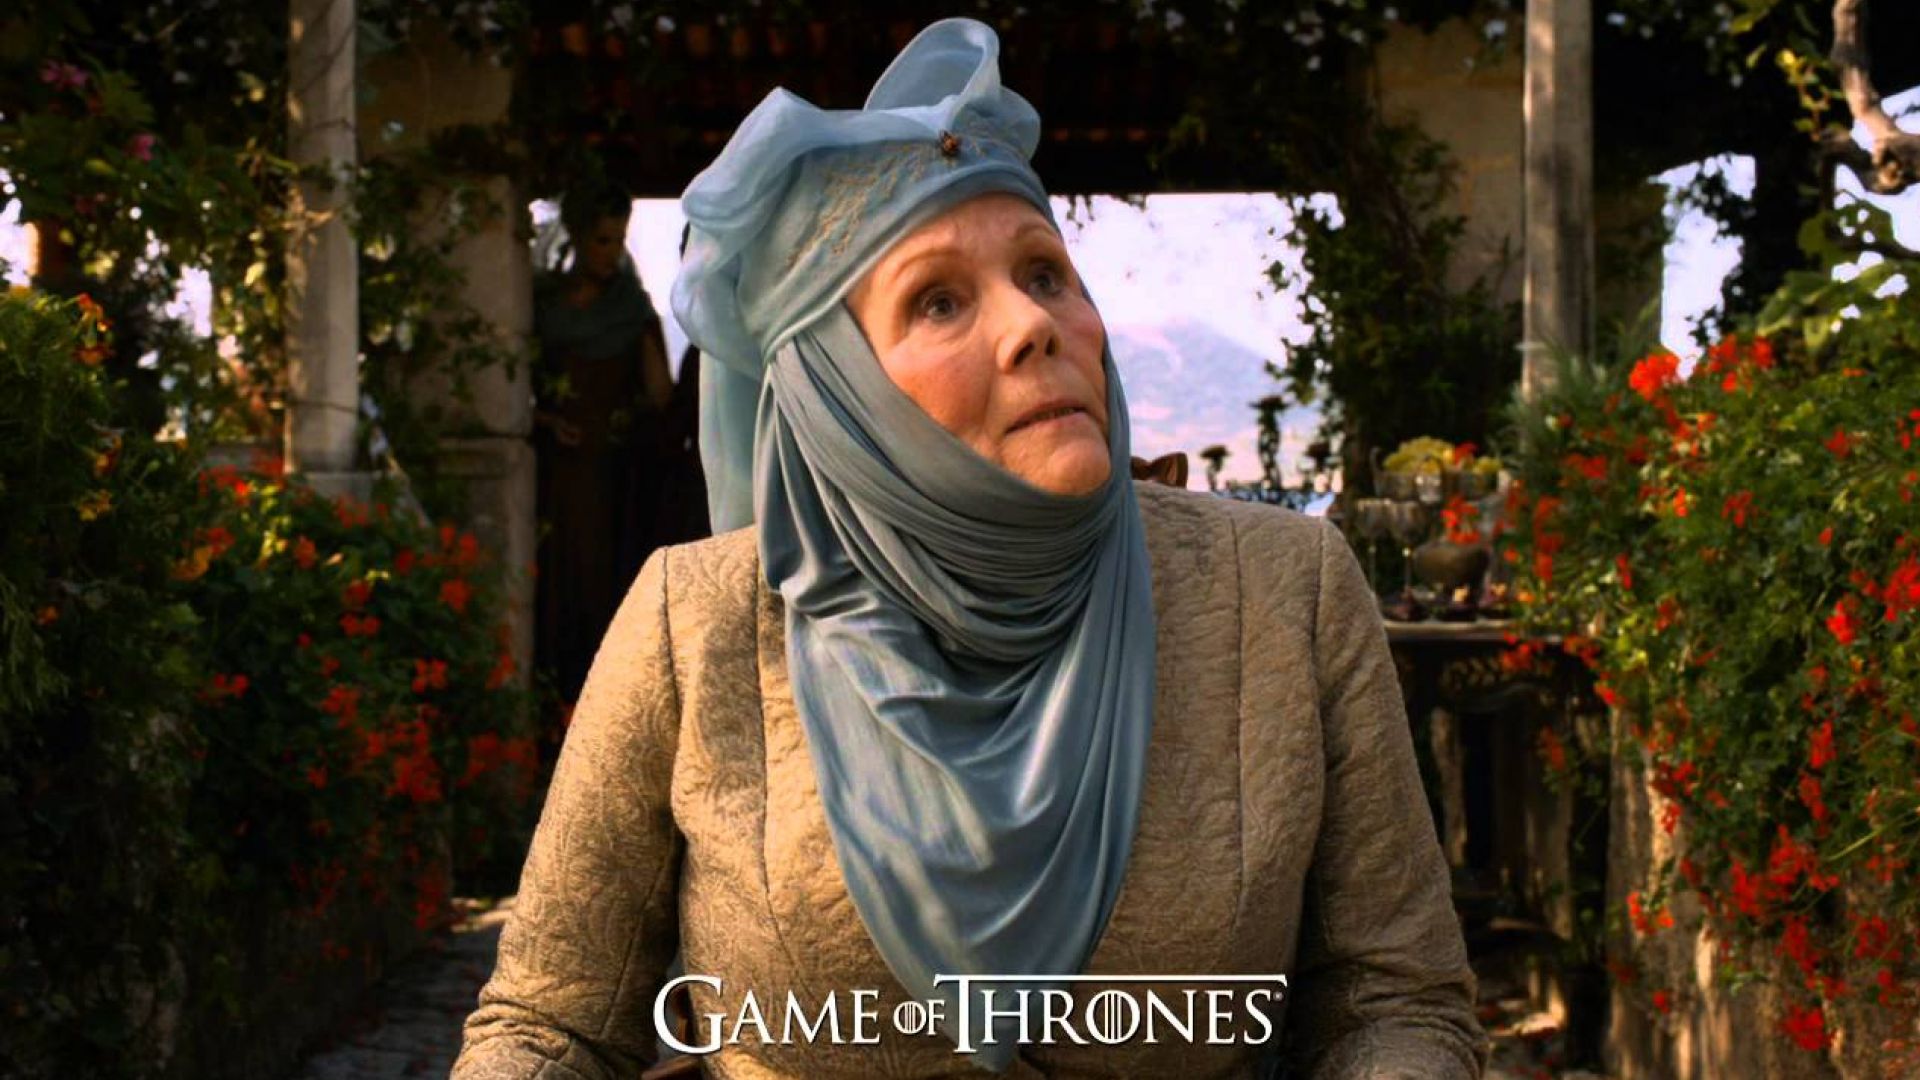 HBO Now: Game of Thrones: Mother’s Day “Olenna And Sansa